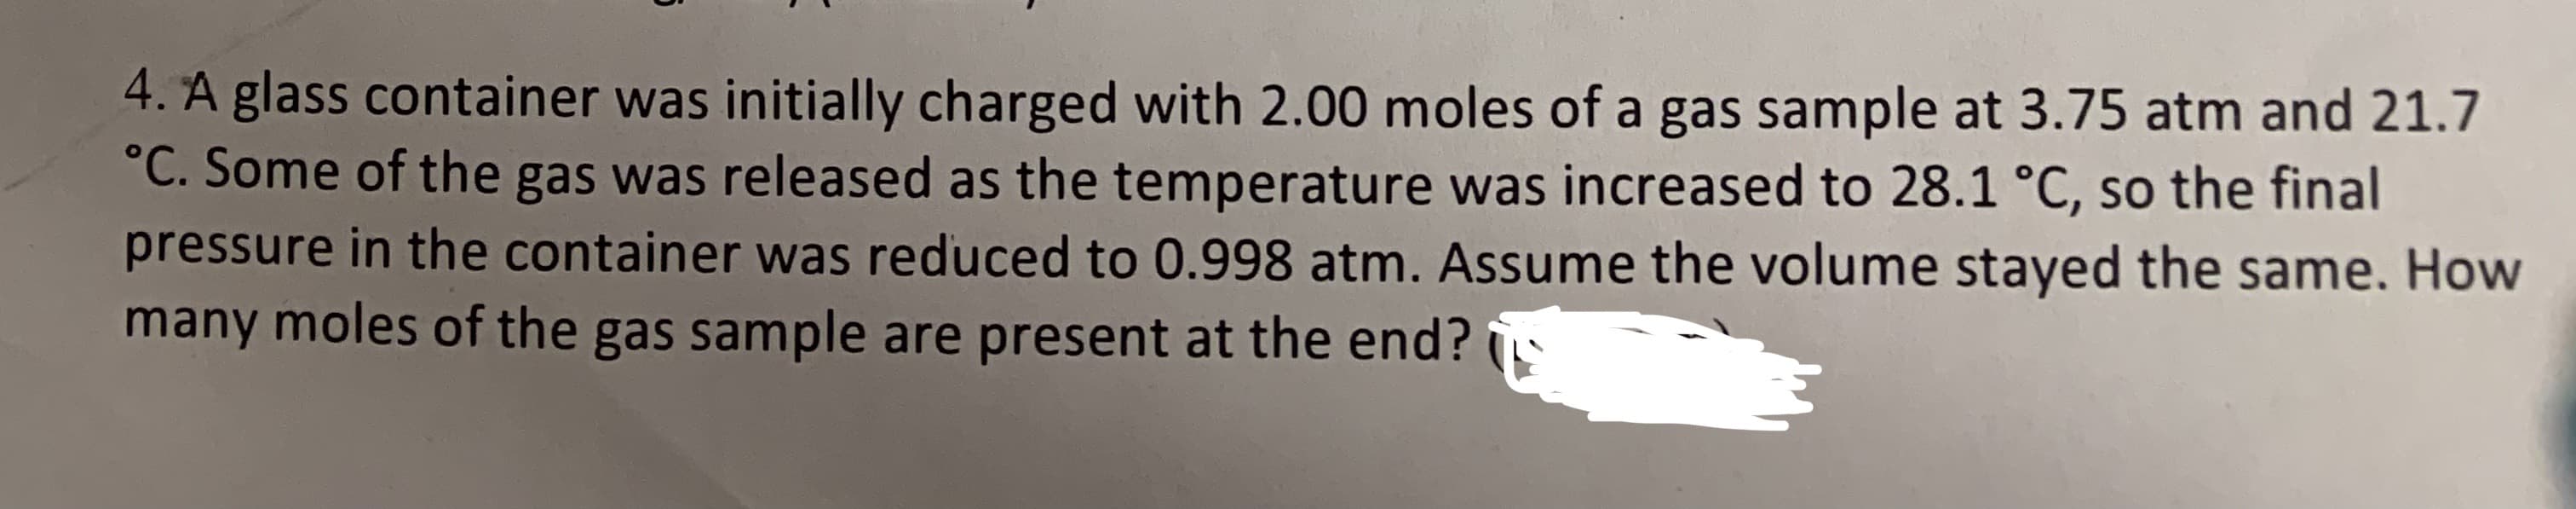 4. A glass container was initially charged with 2.00 moles of a gas sample at 3.75 atm and 21.7
°C. Some of the gas was released as the temperature was increased to 28.1 °C, so the final
pressure in the container was reduced to 0.998 atm. Assume the volume stayed the same. How
many moles of the gas sample are present at the end?
